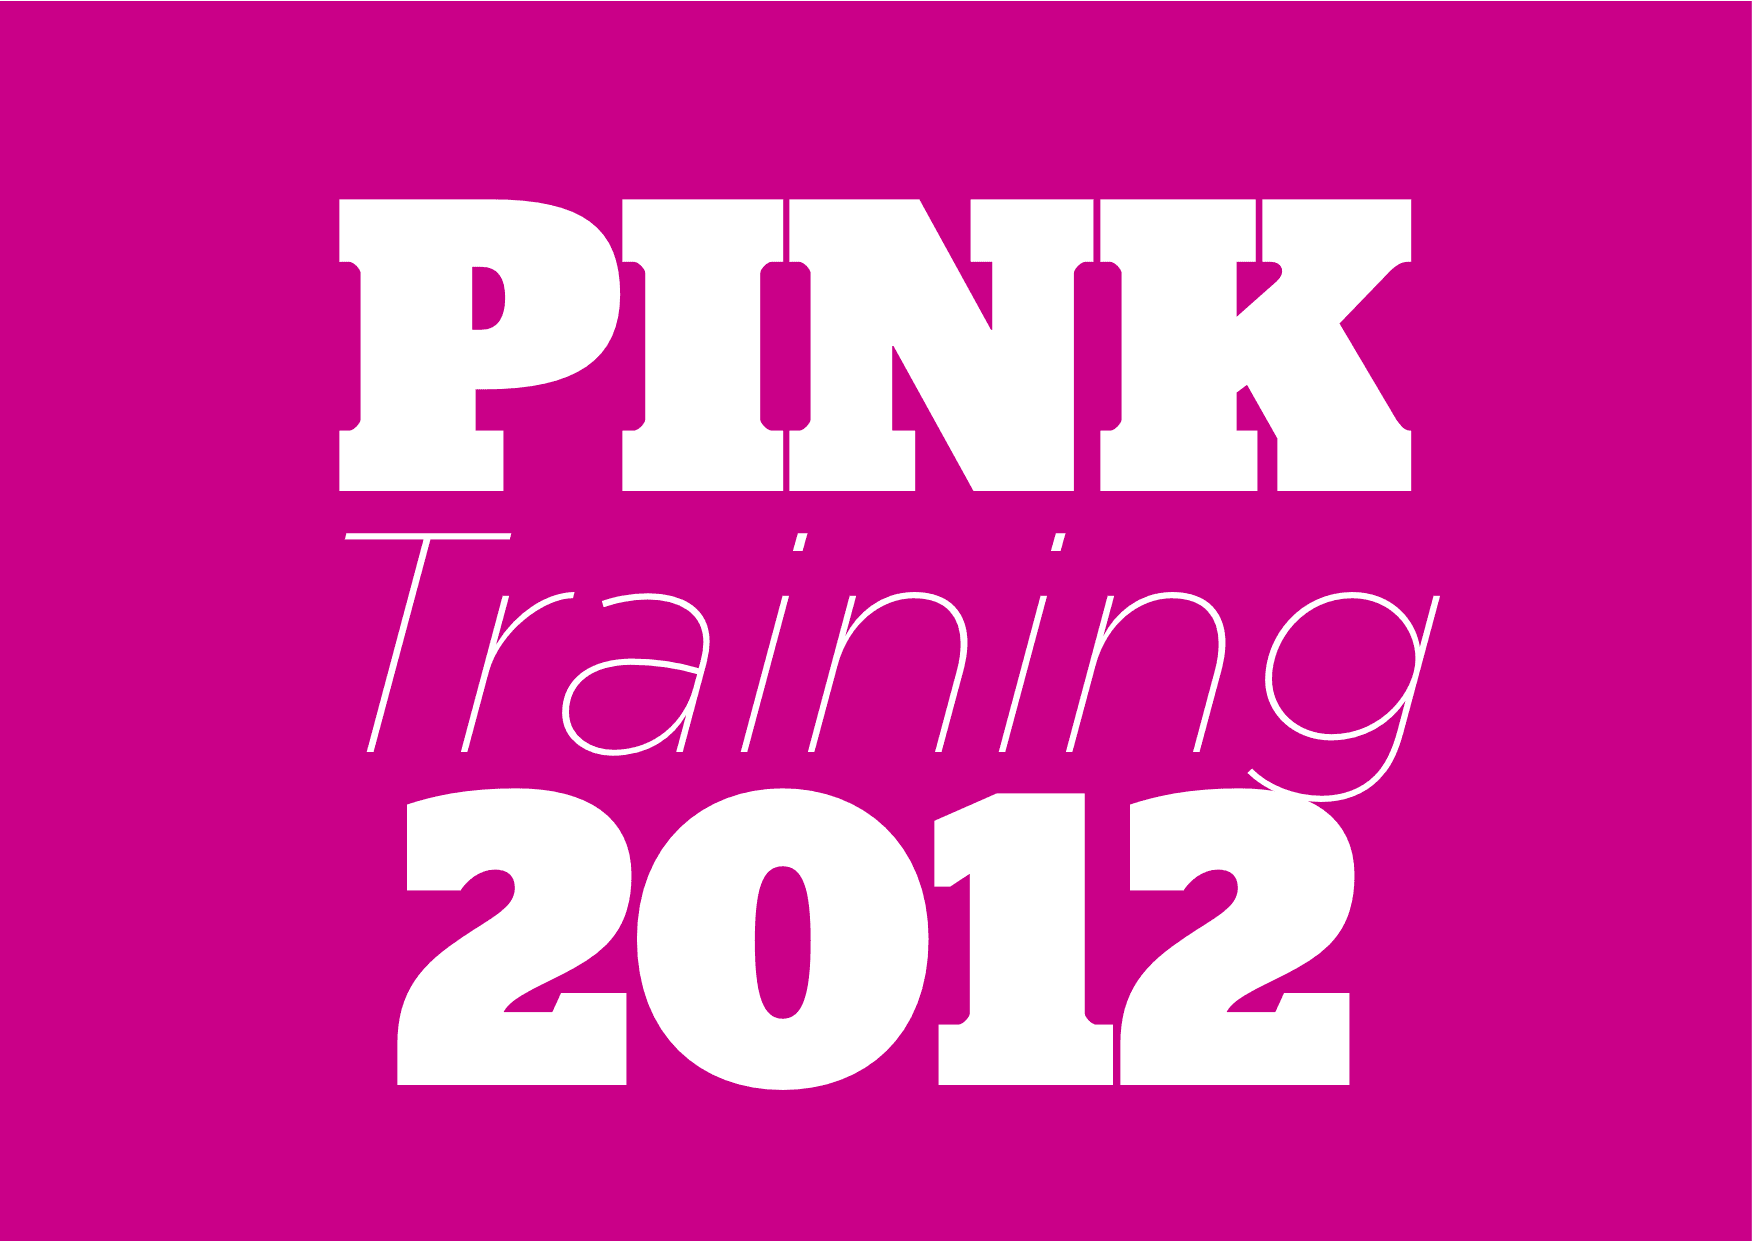 USI to host Pink Training 2012, largest LGBT training event in Europe